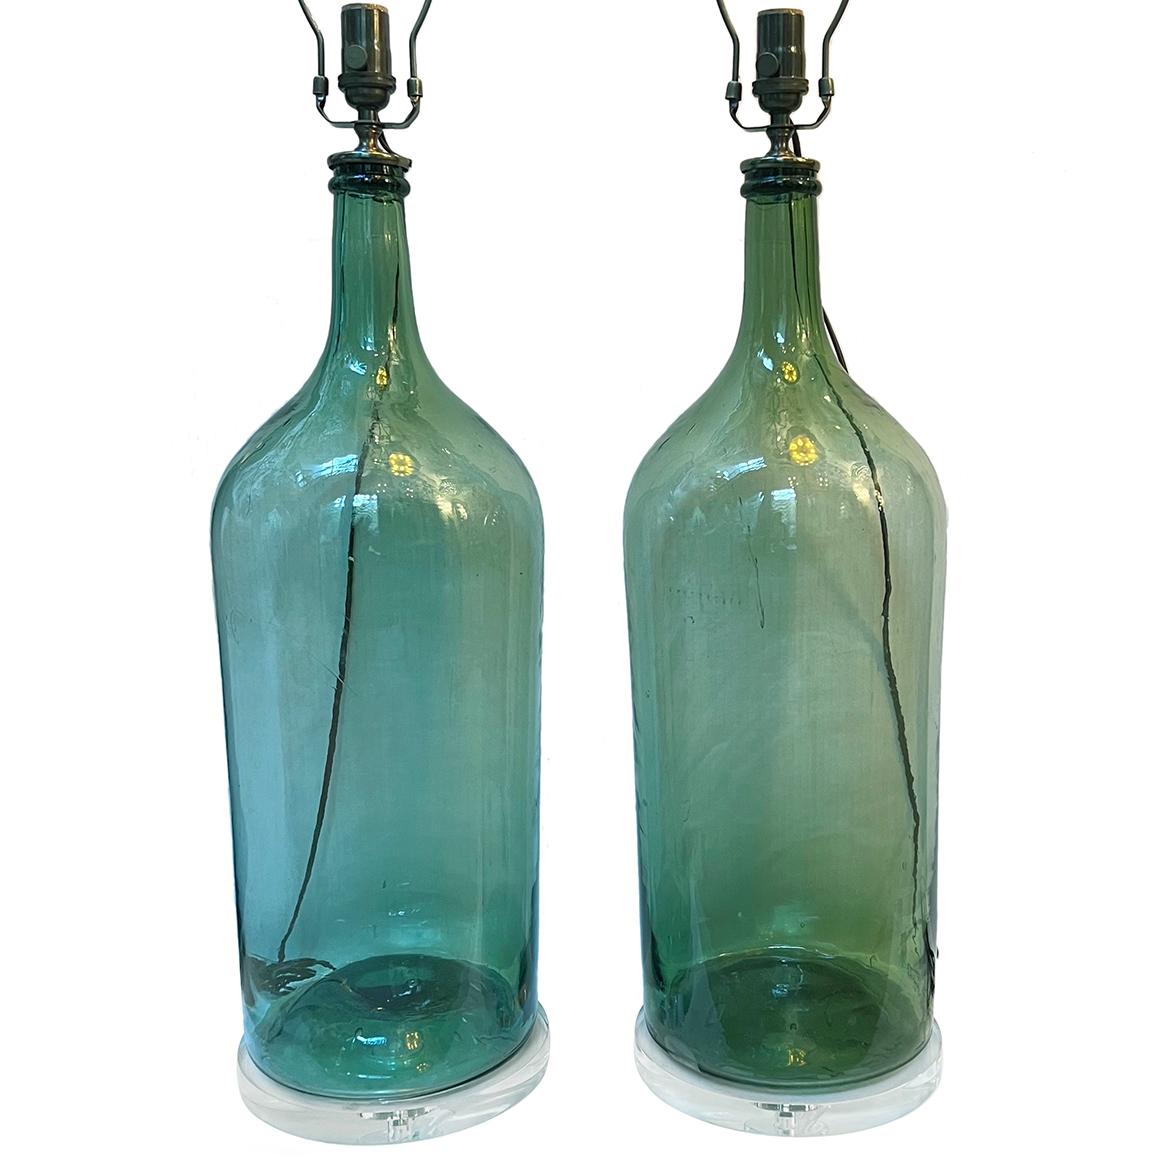 Pair of circa 1920's Italian bottle lamps.

Measurements:
Height of body: 26